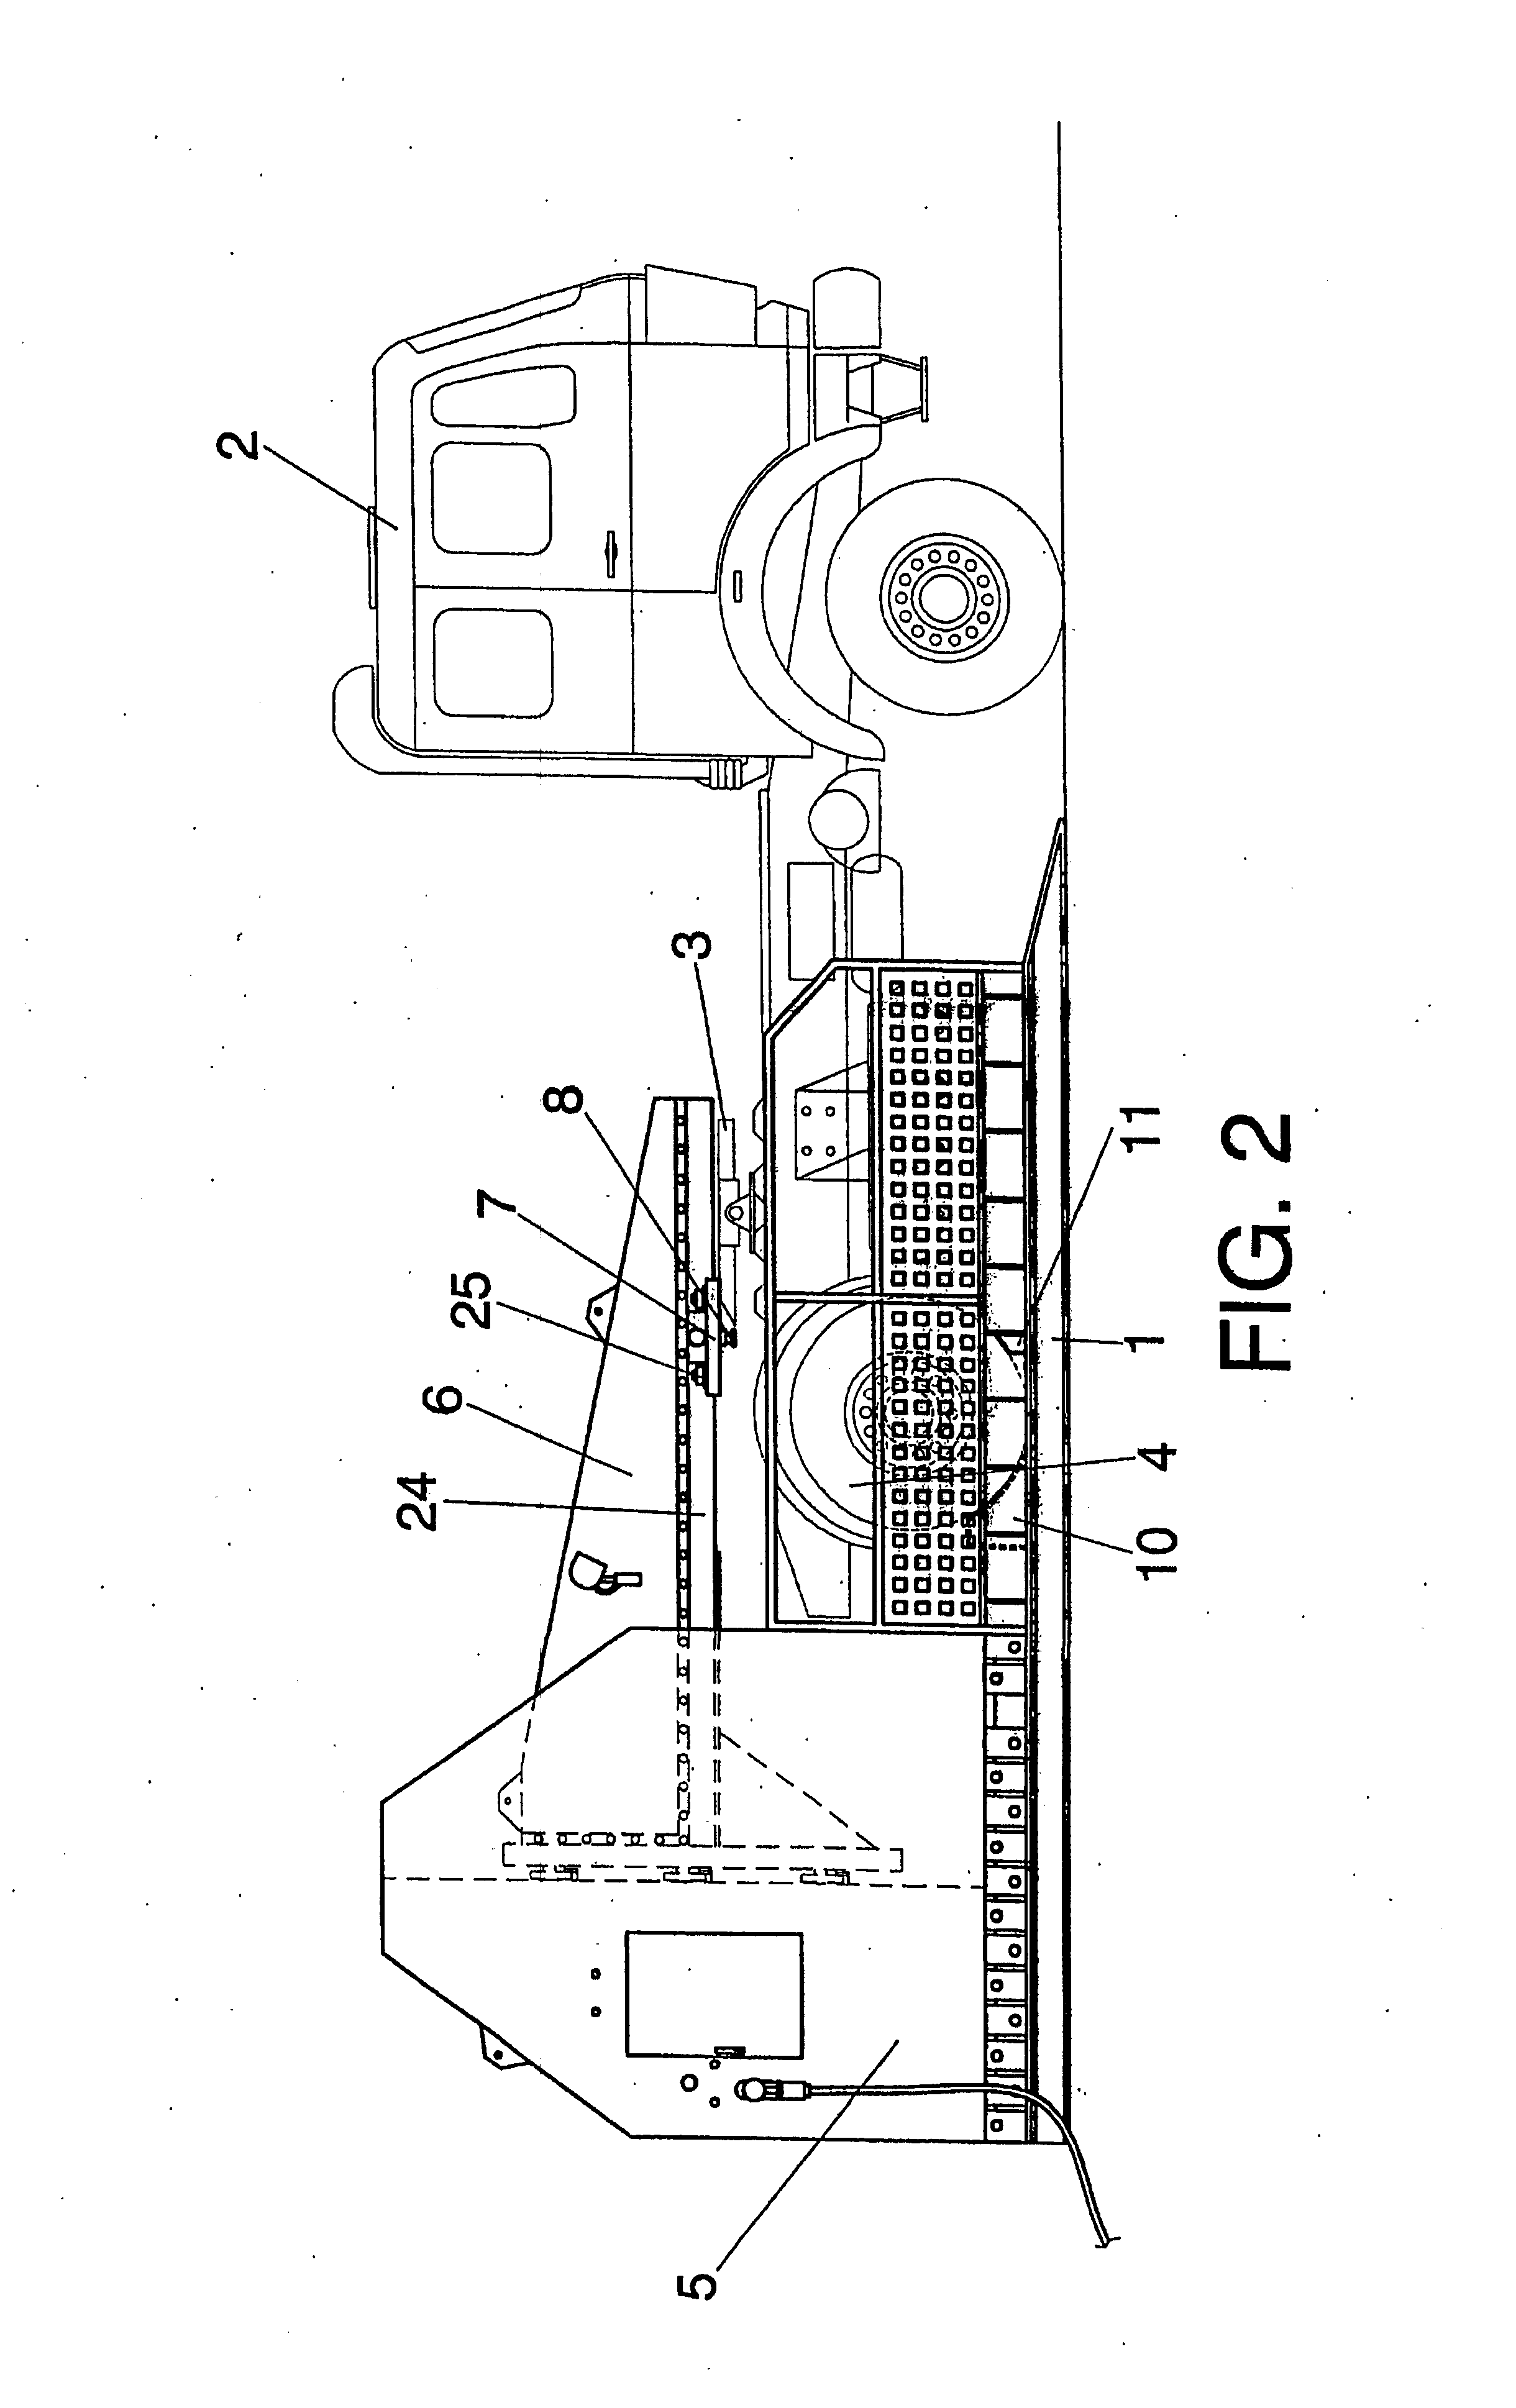 Machine for Inspecting the Coupling System Used to Hitch a Semi-Trailer to a Towing Vehicle